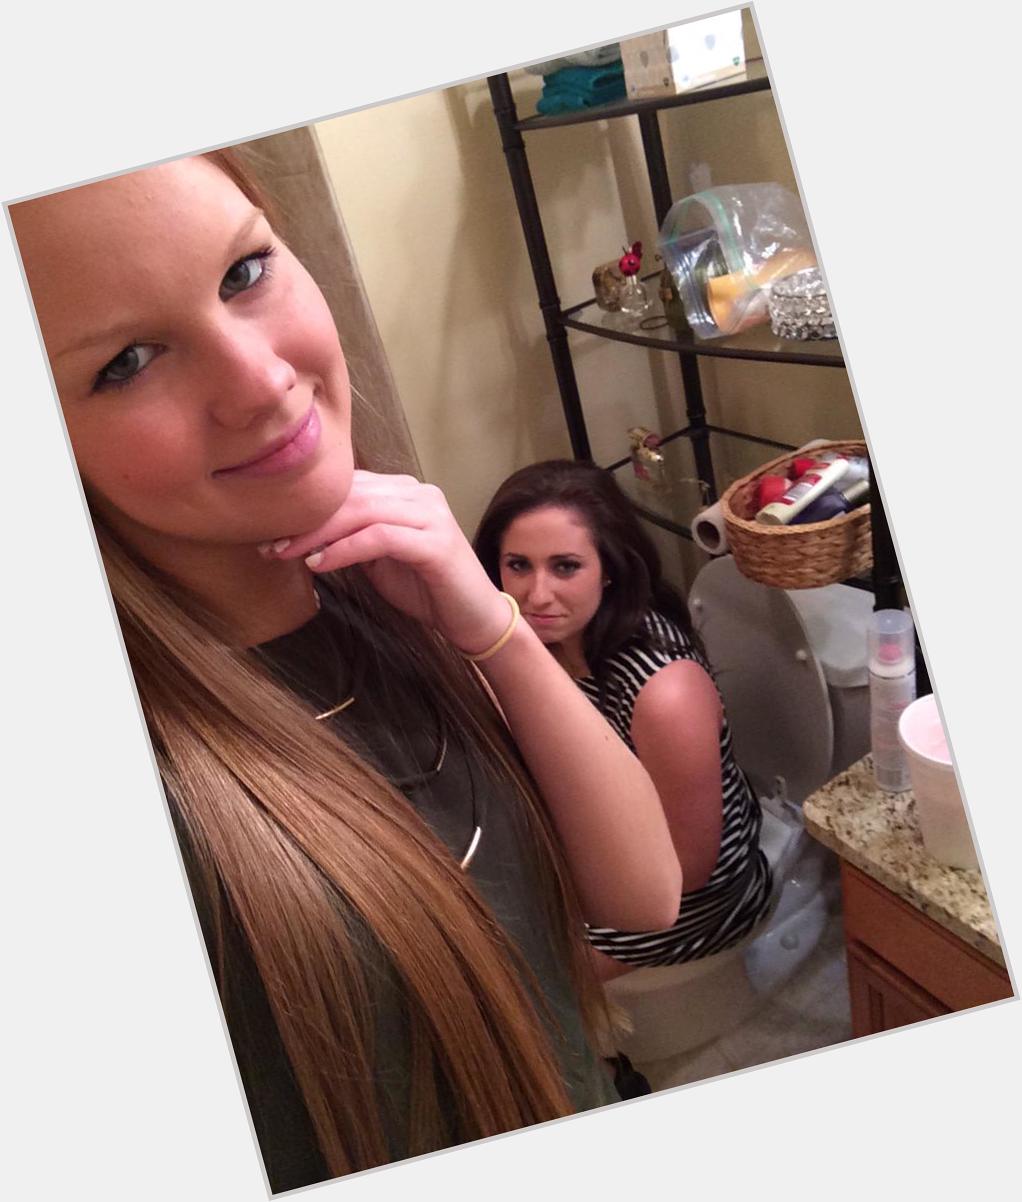 Happy birthday to the girl who can rock the toilet look before and after a night of fun  